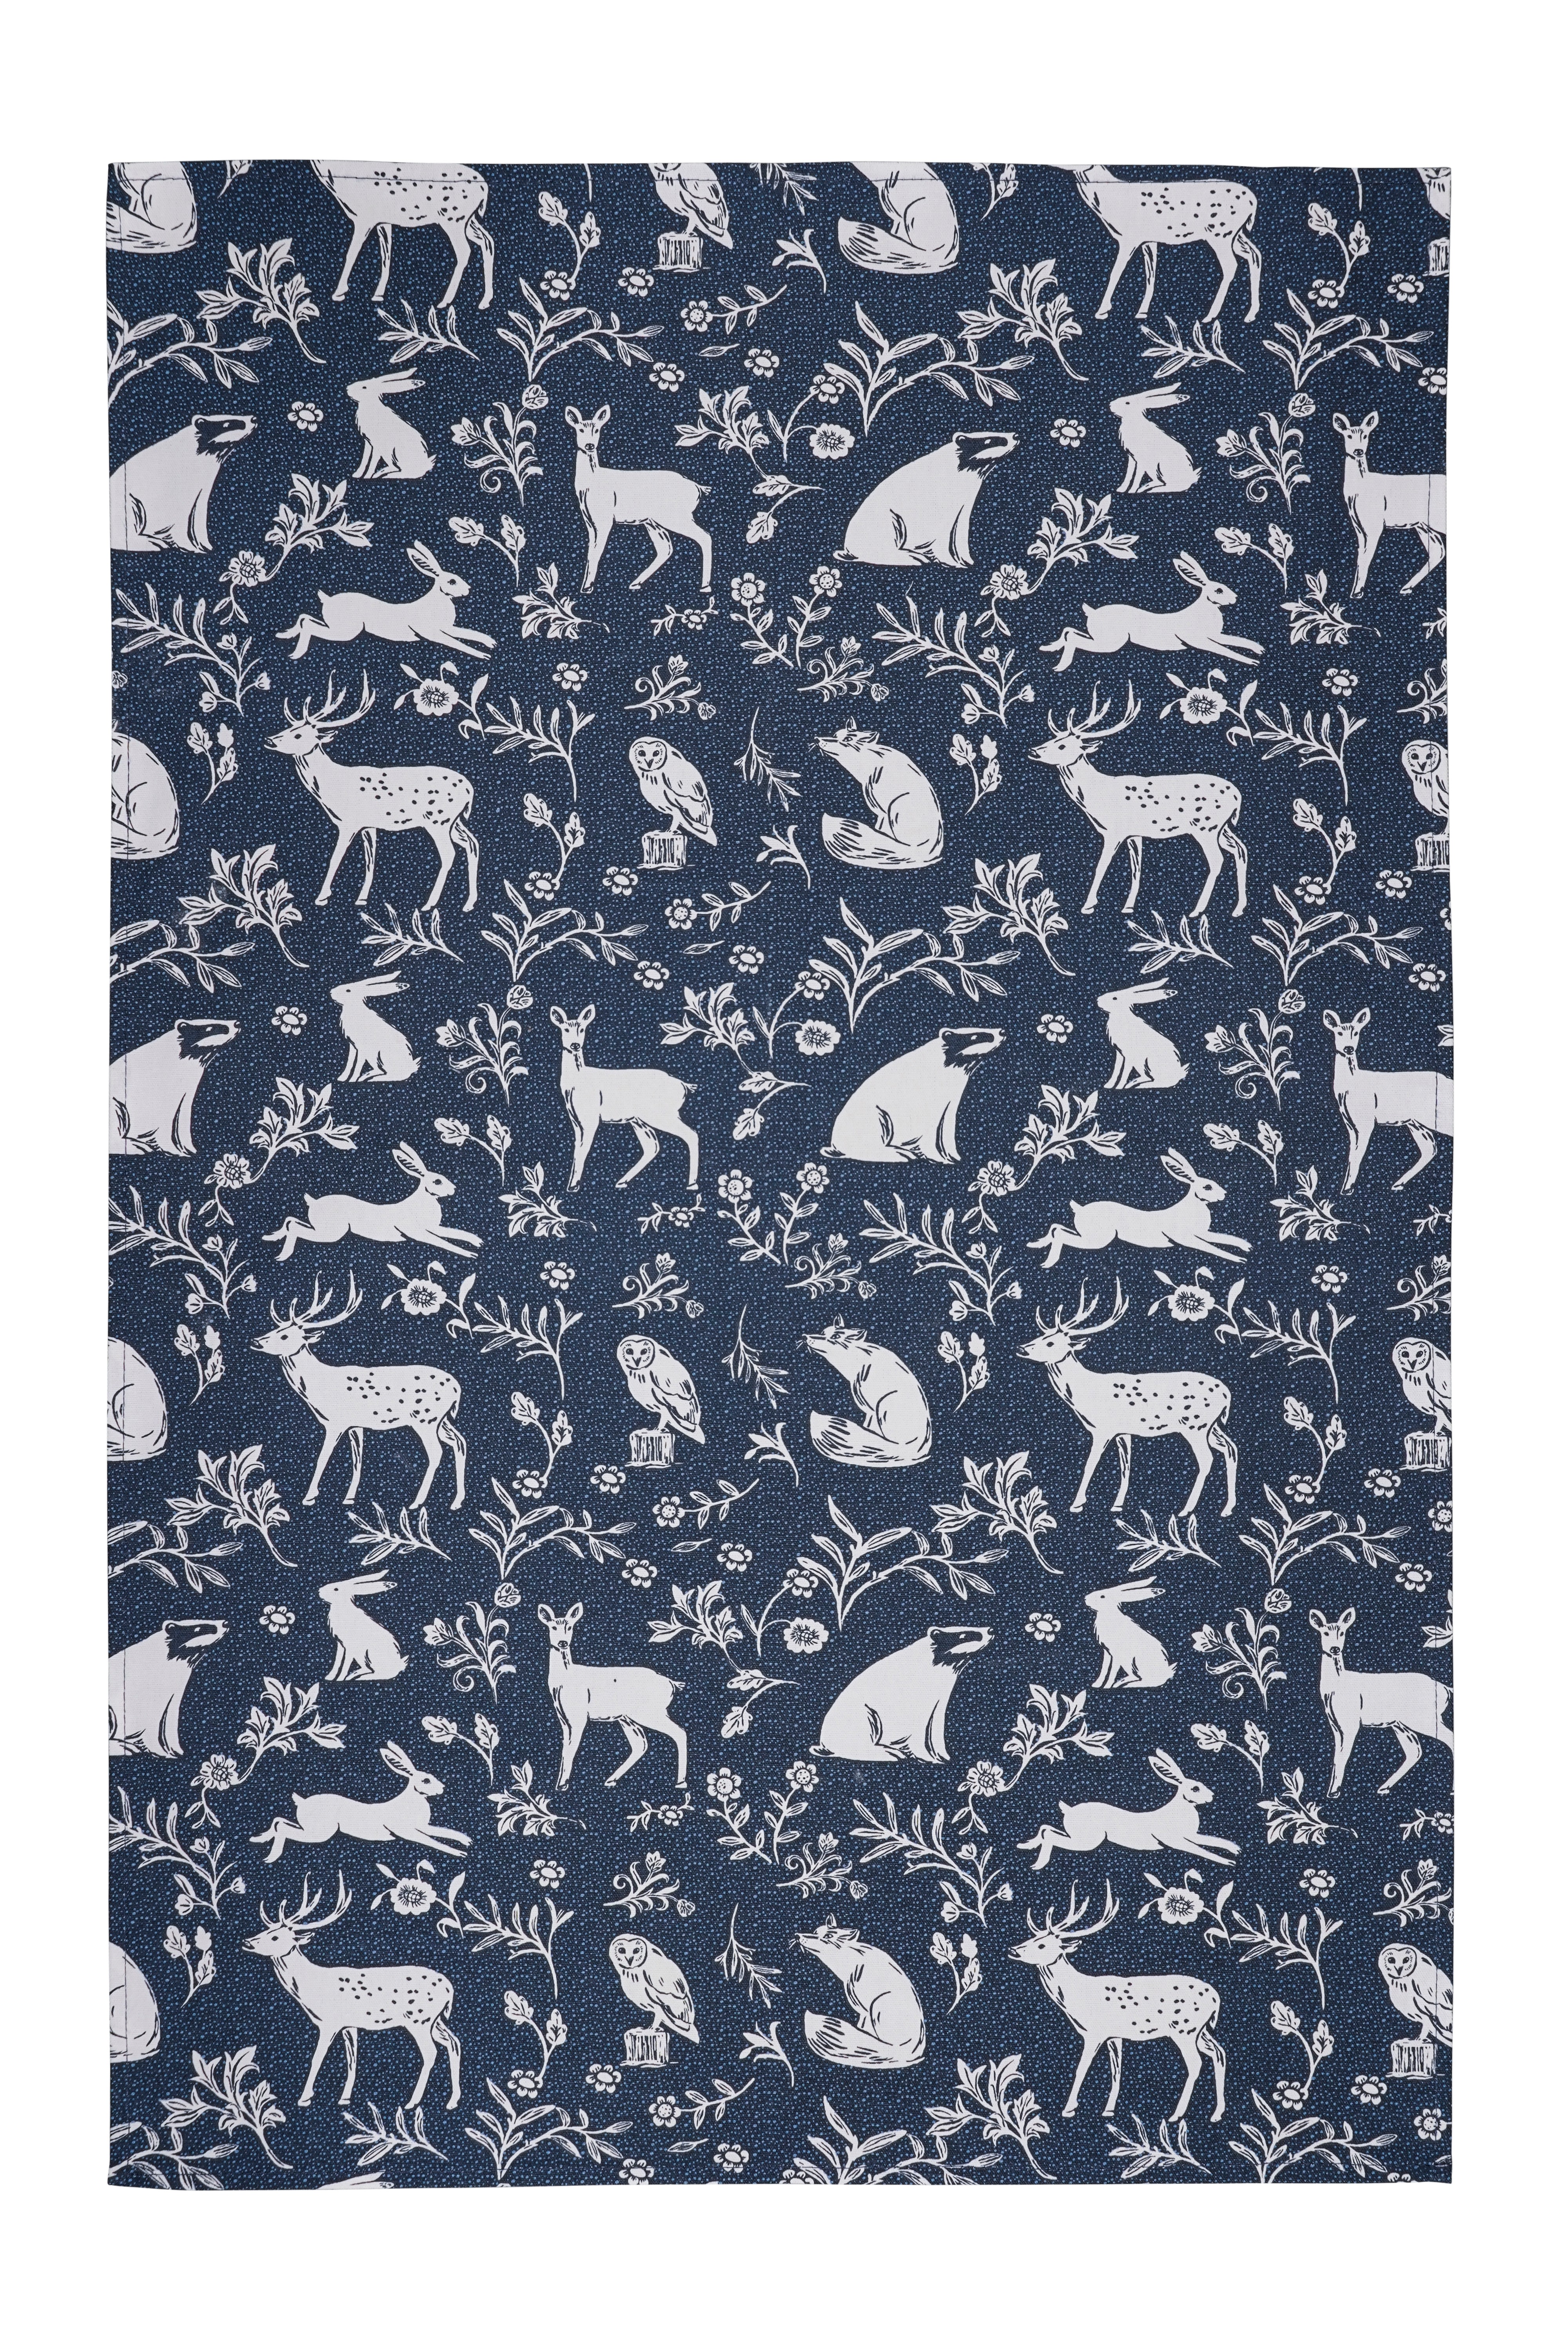 Ulster Weaver's Forest Friends Navy Cotton Tea Towel Twin Pack